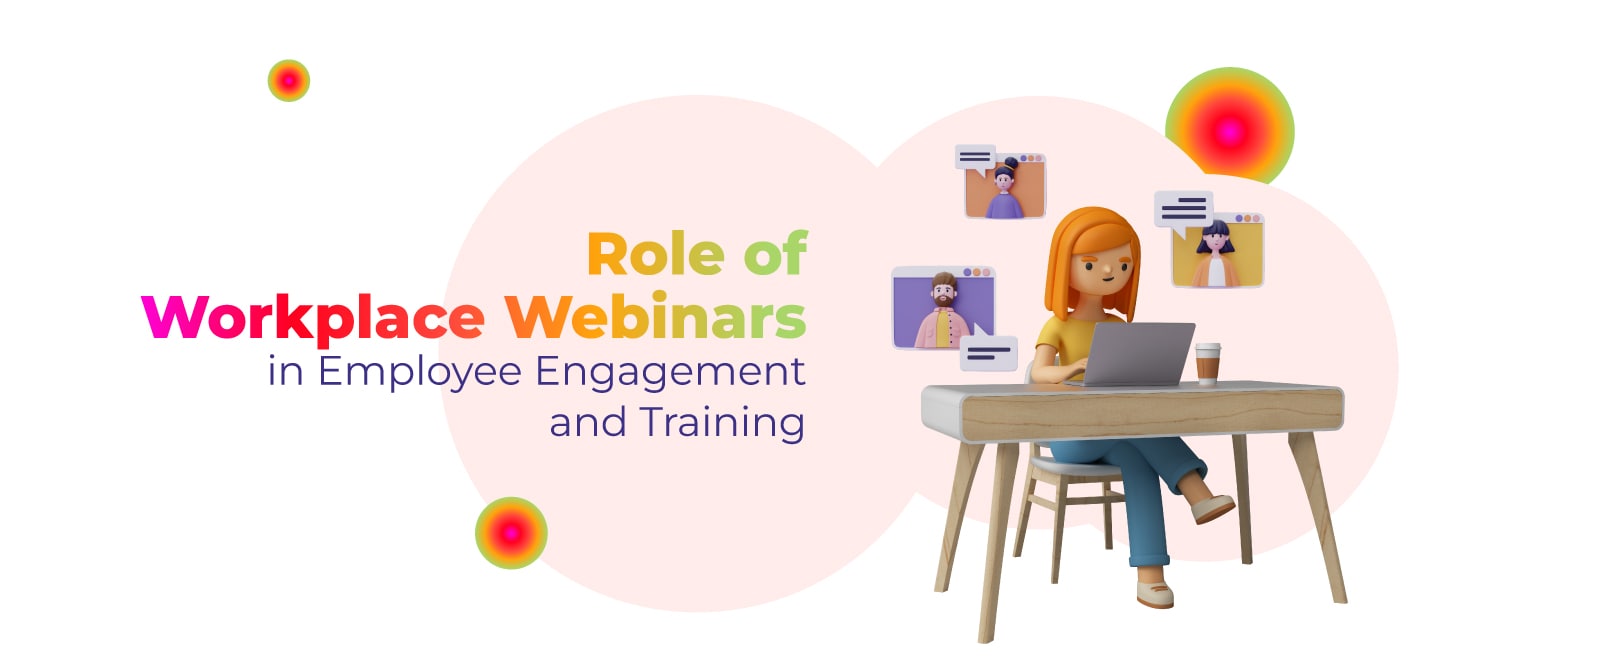 Role of Workplace Webinars in Employee Engagement and Training